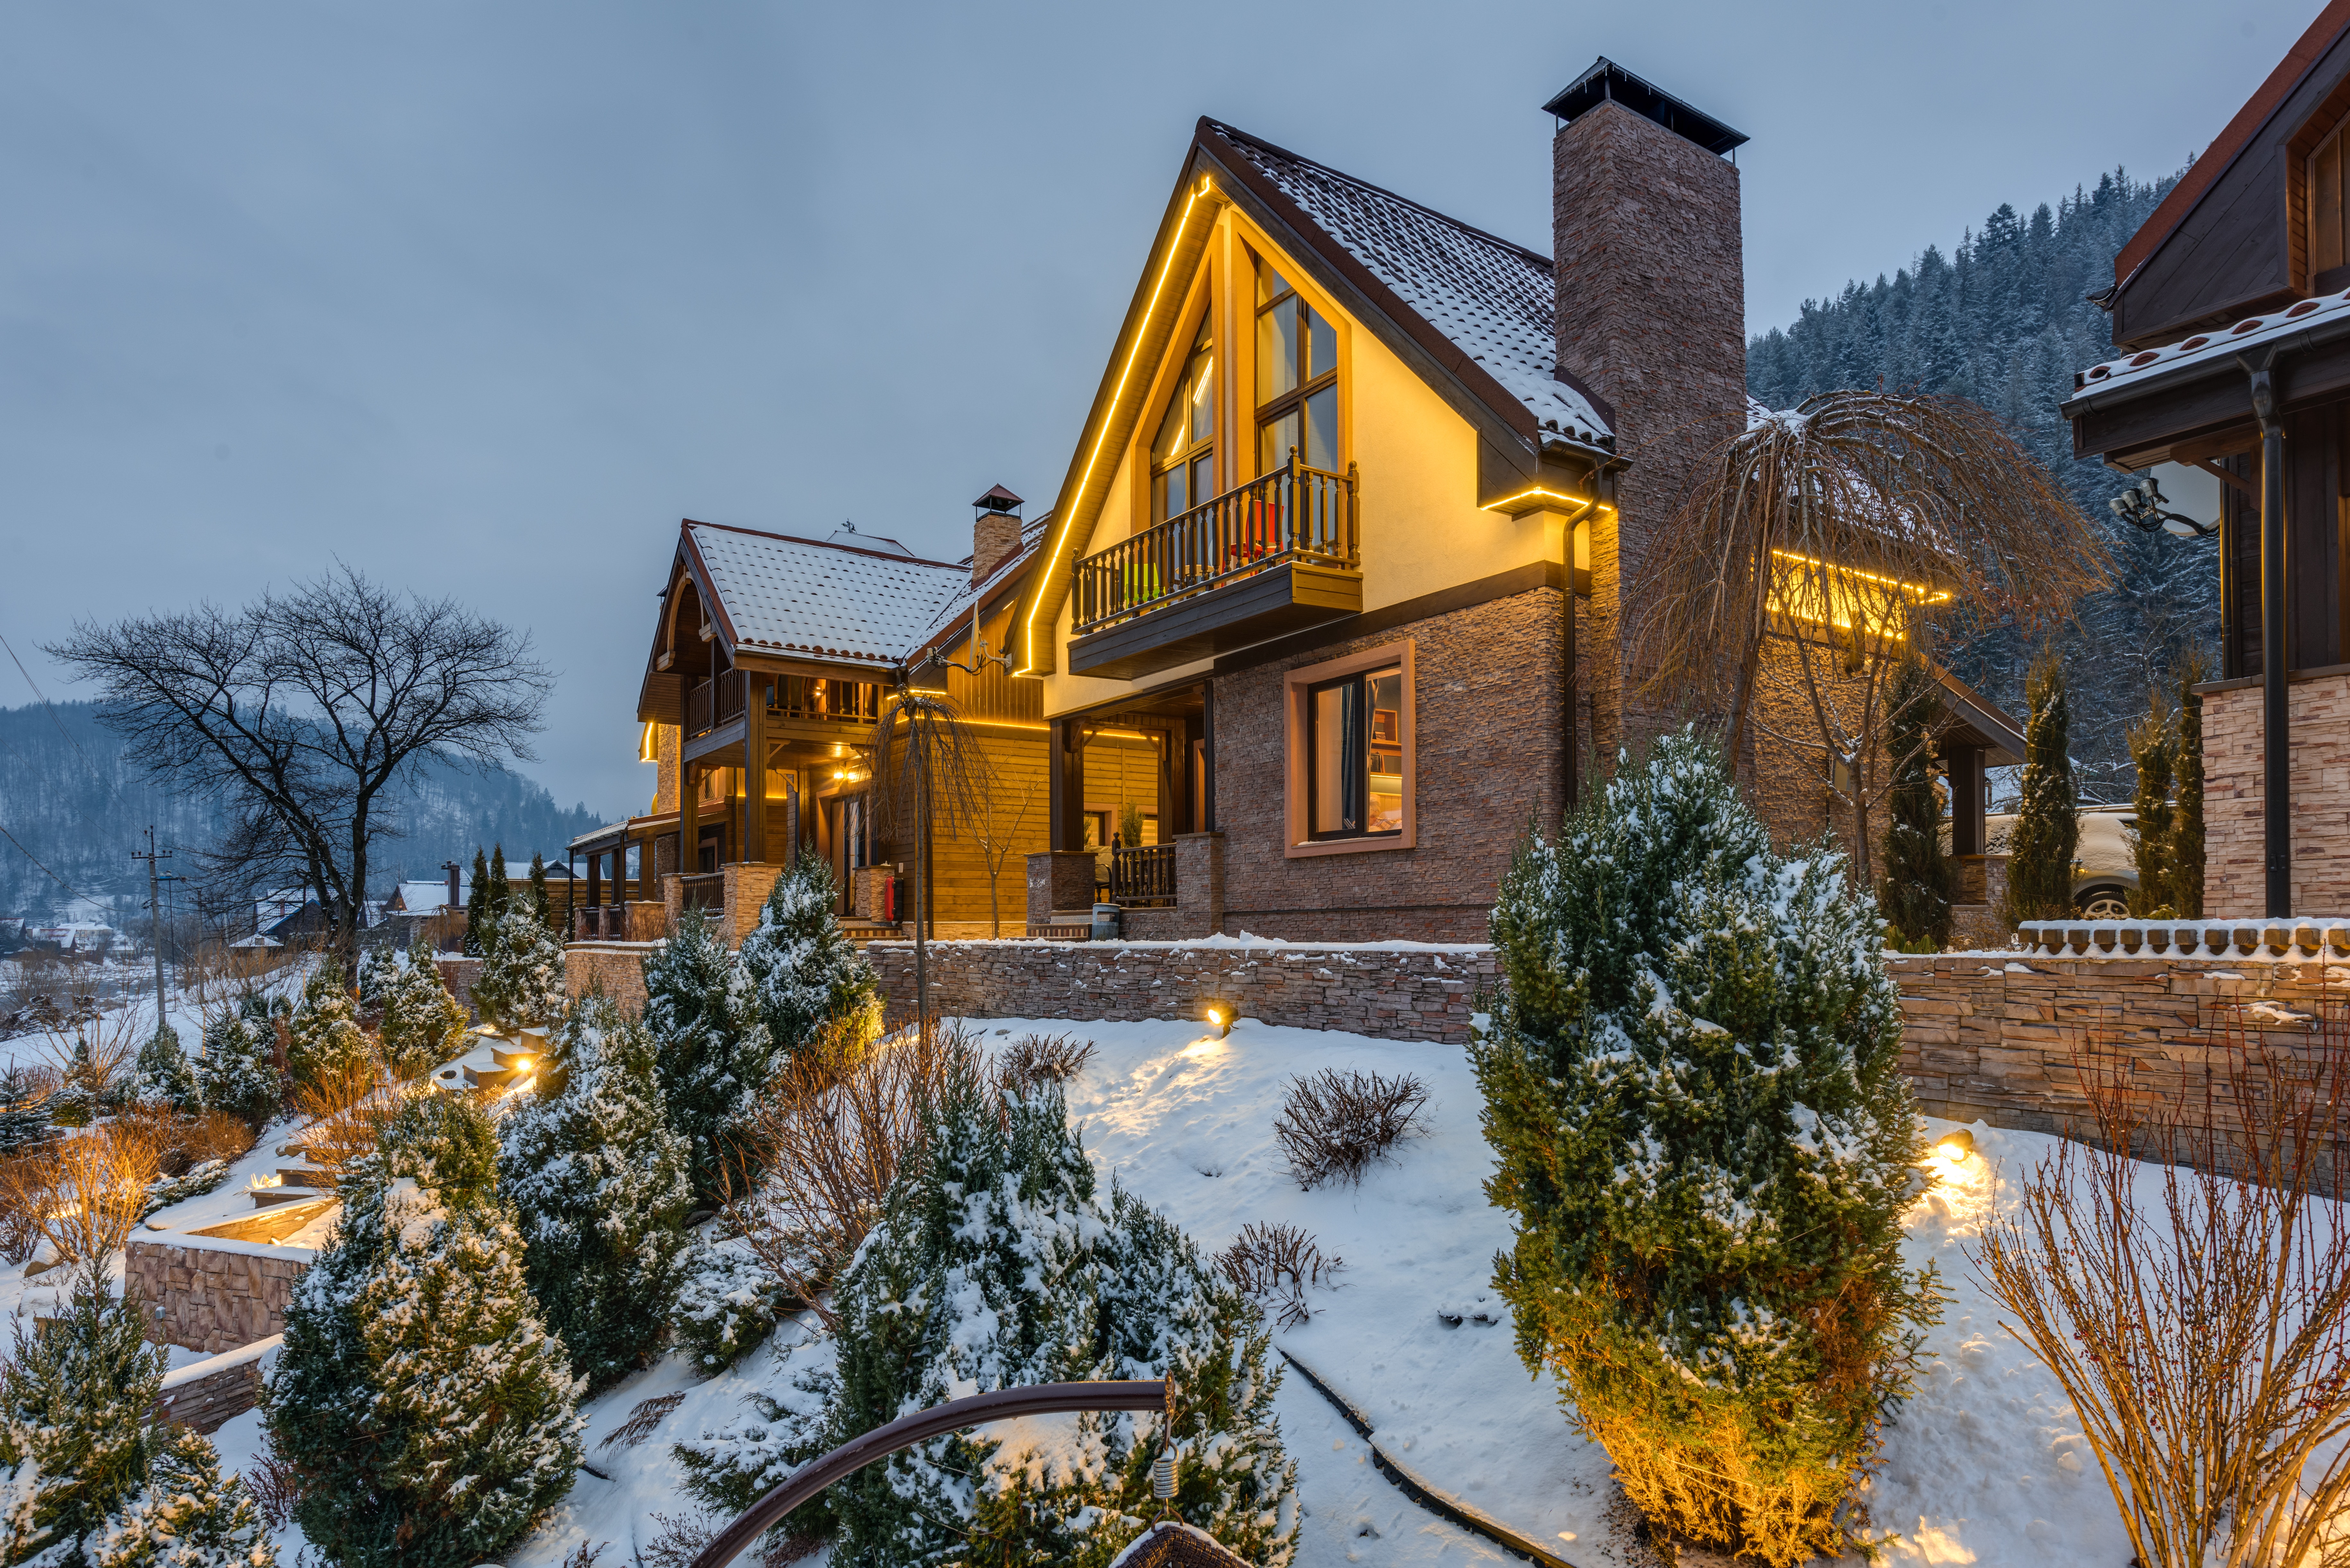 Be Proactive: Winterize Your Home Before It's Too Late